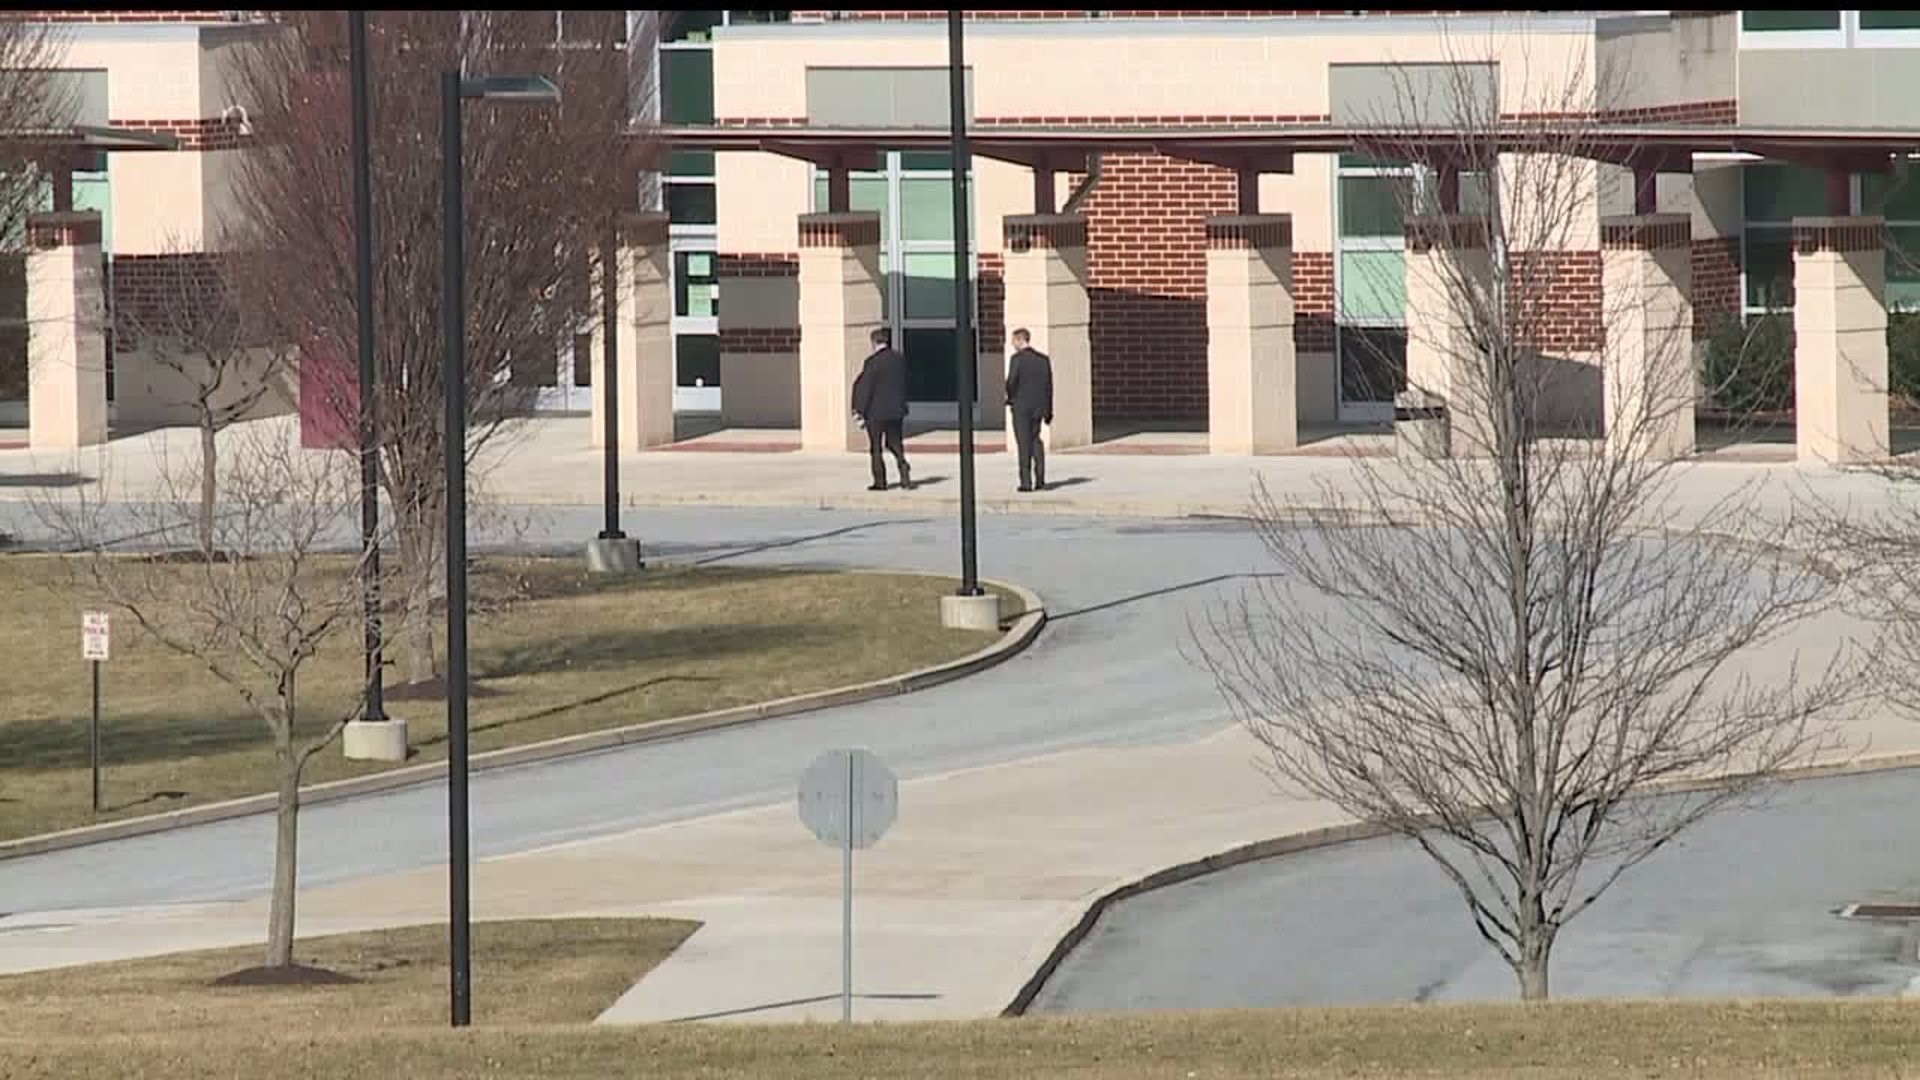 Schools in the Central York School District will be closed for the third day in a row as authorities continue to investigate social media threats